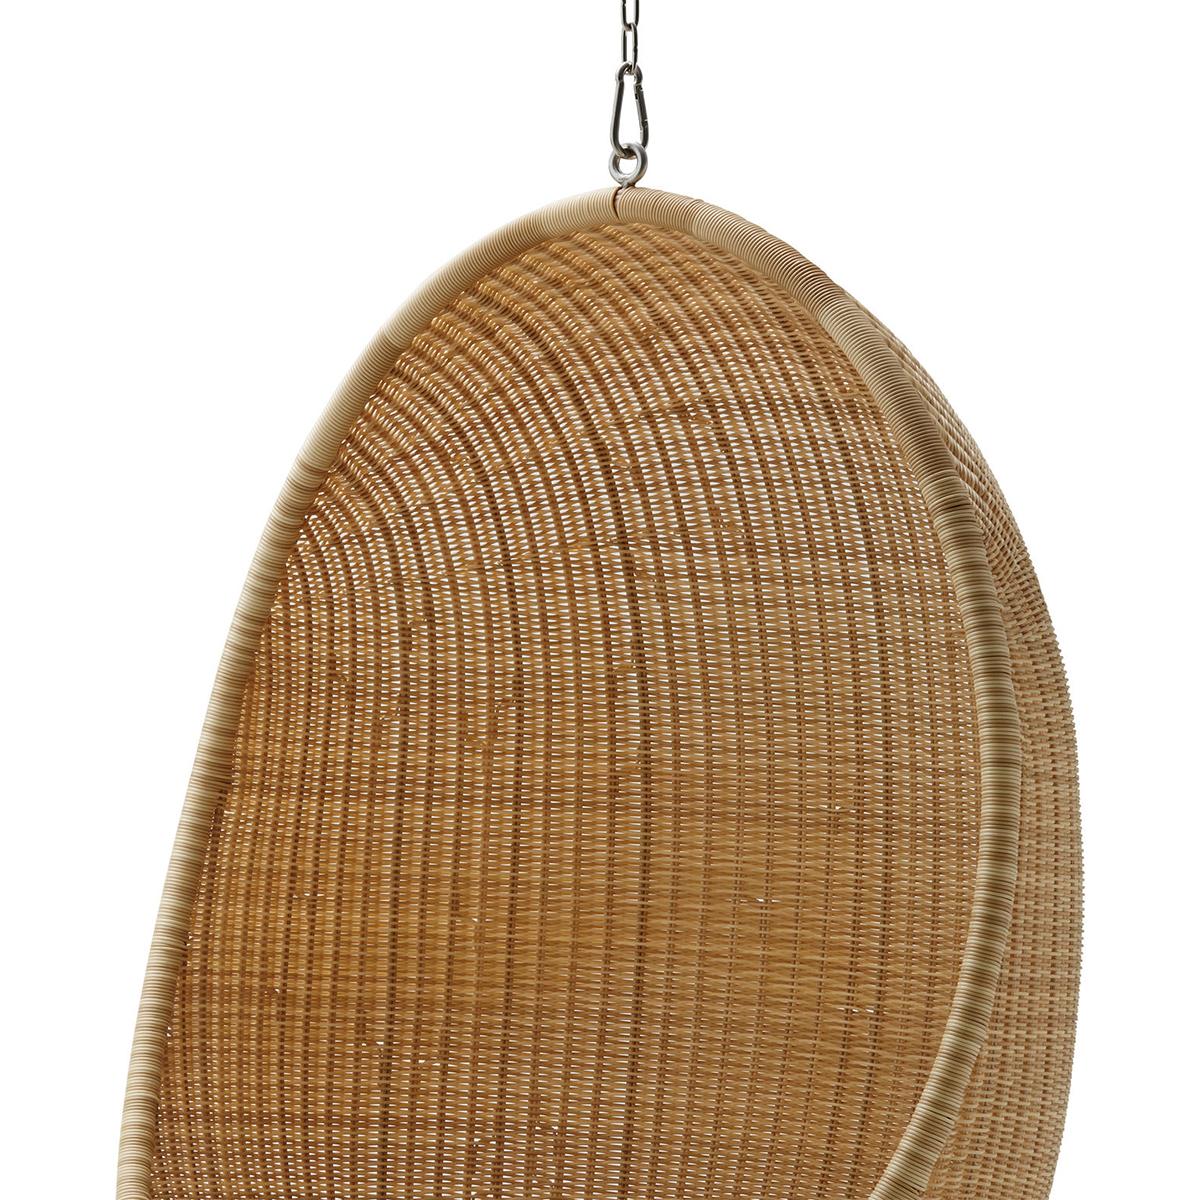 Indonesian Cocoon Hanging Chair For Sale